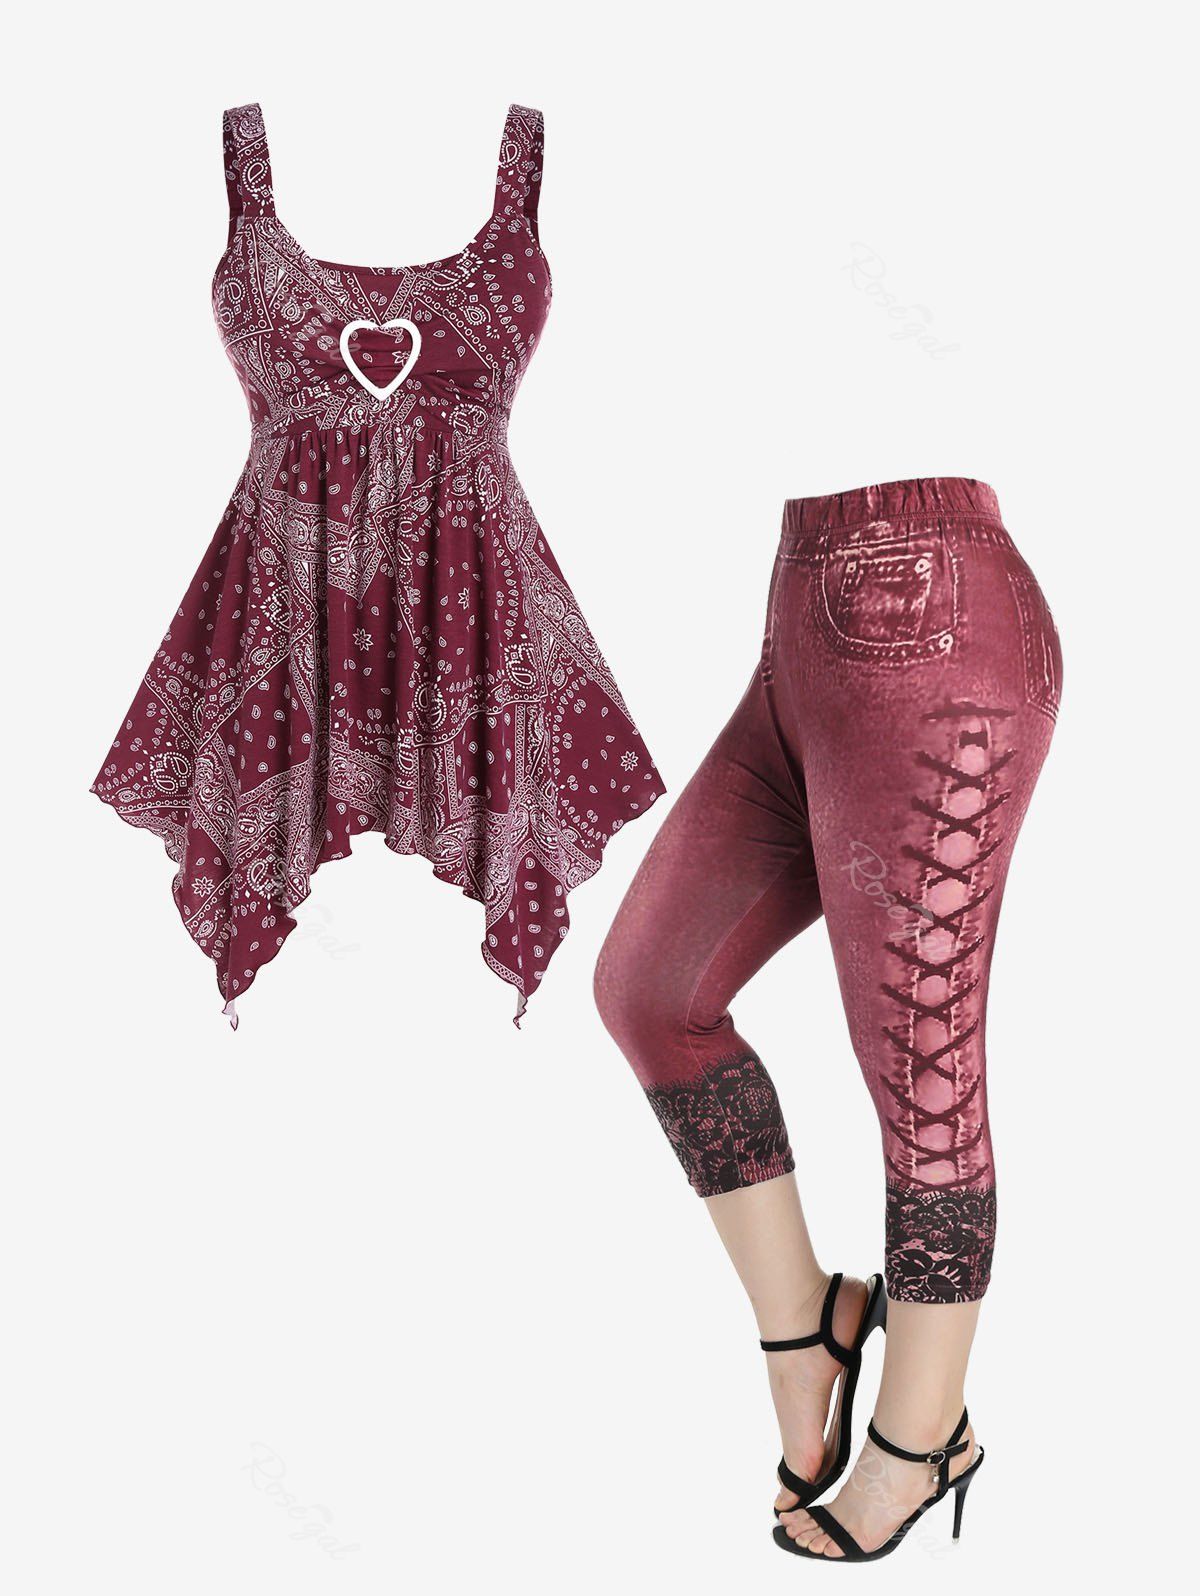 Discount Tribal Paisley Print Heart Ring Handkerchief Tank Top and Leggings Plus Size Summer Outfit  